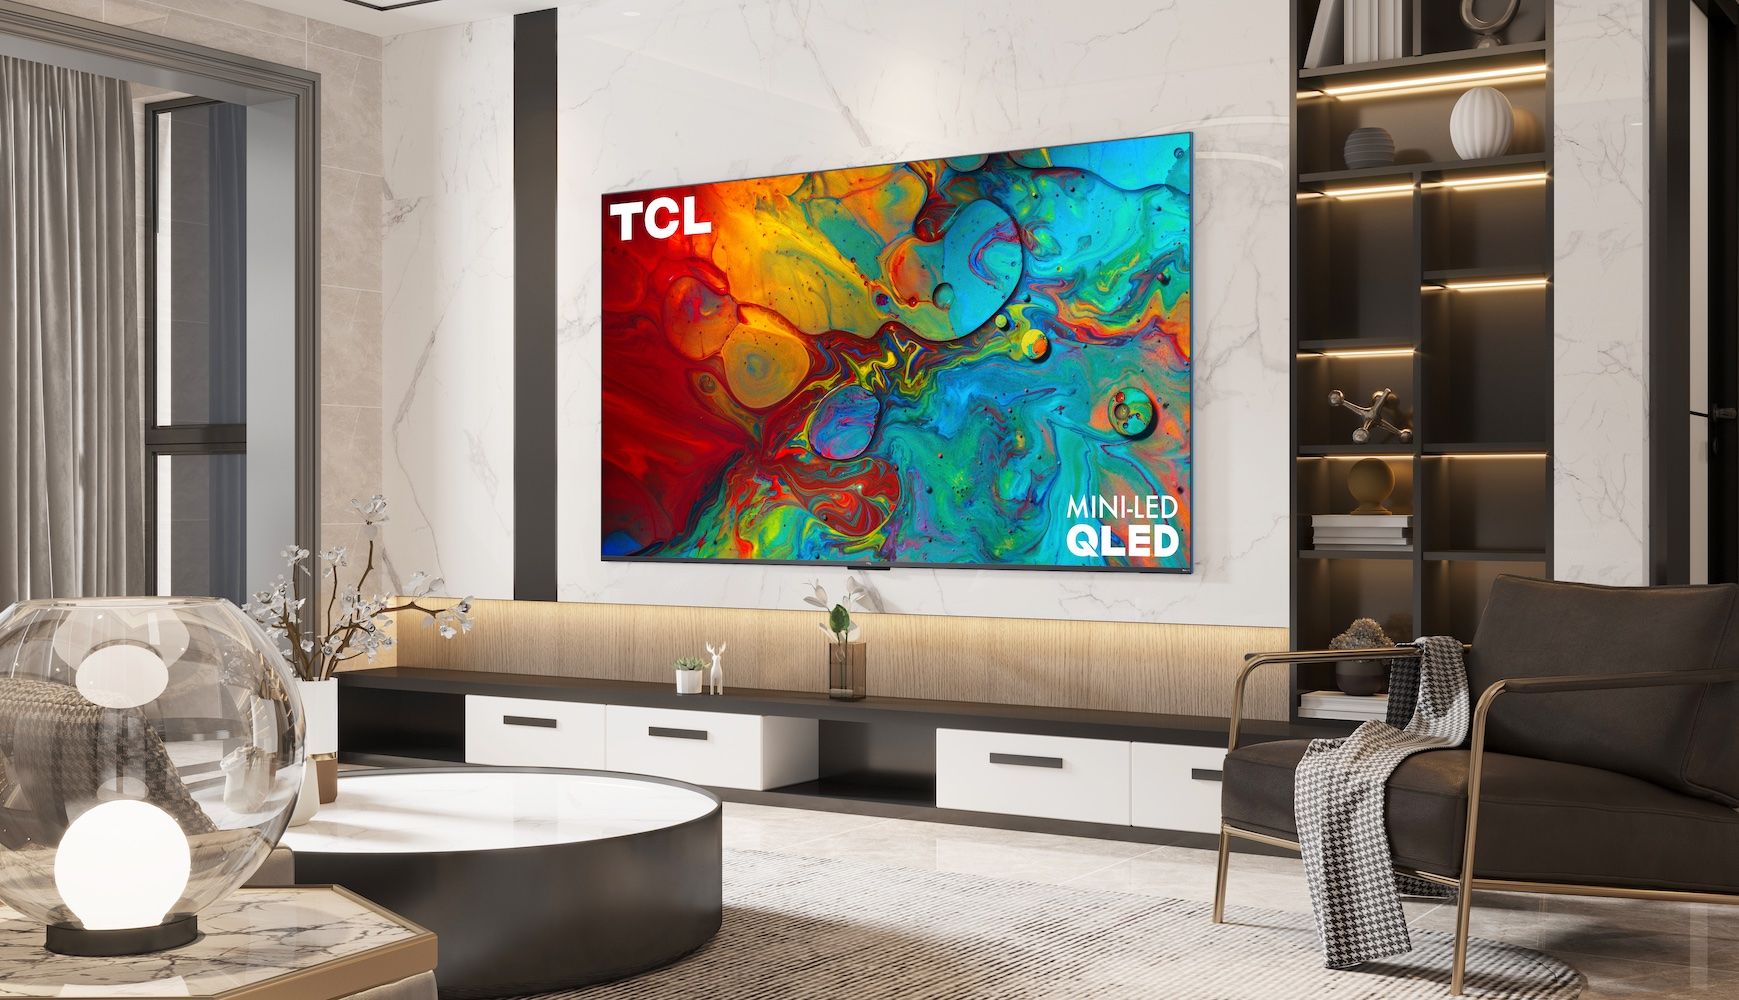 The new TCL 6-Series TV (85R655) is an 85-inch Mini LED monster for $1,999 photo 1